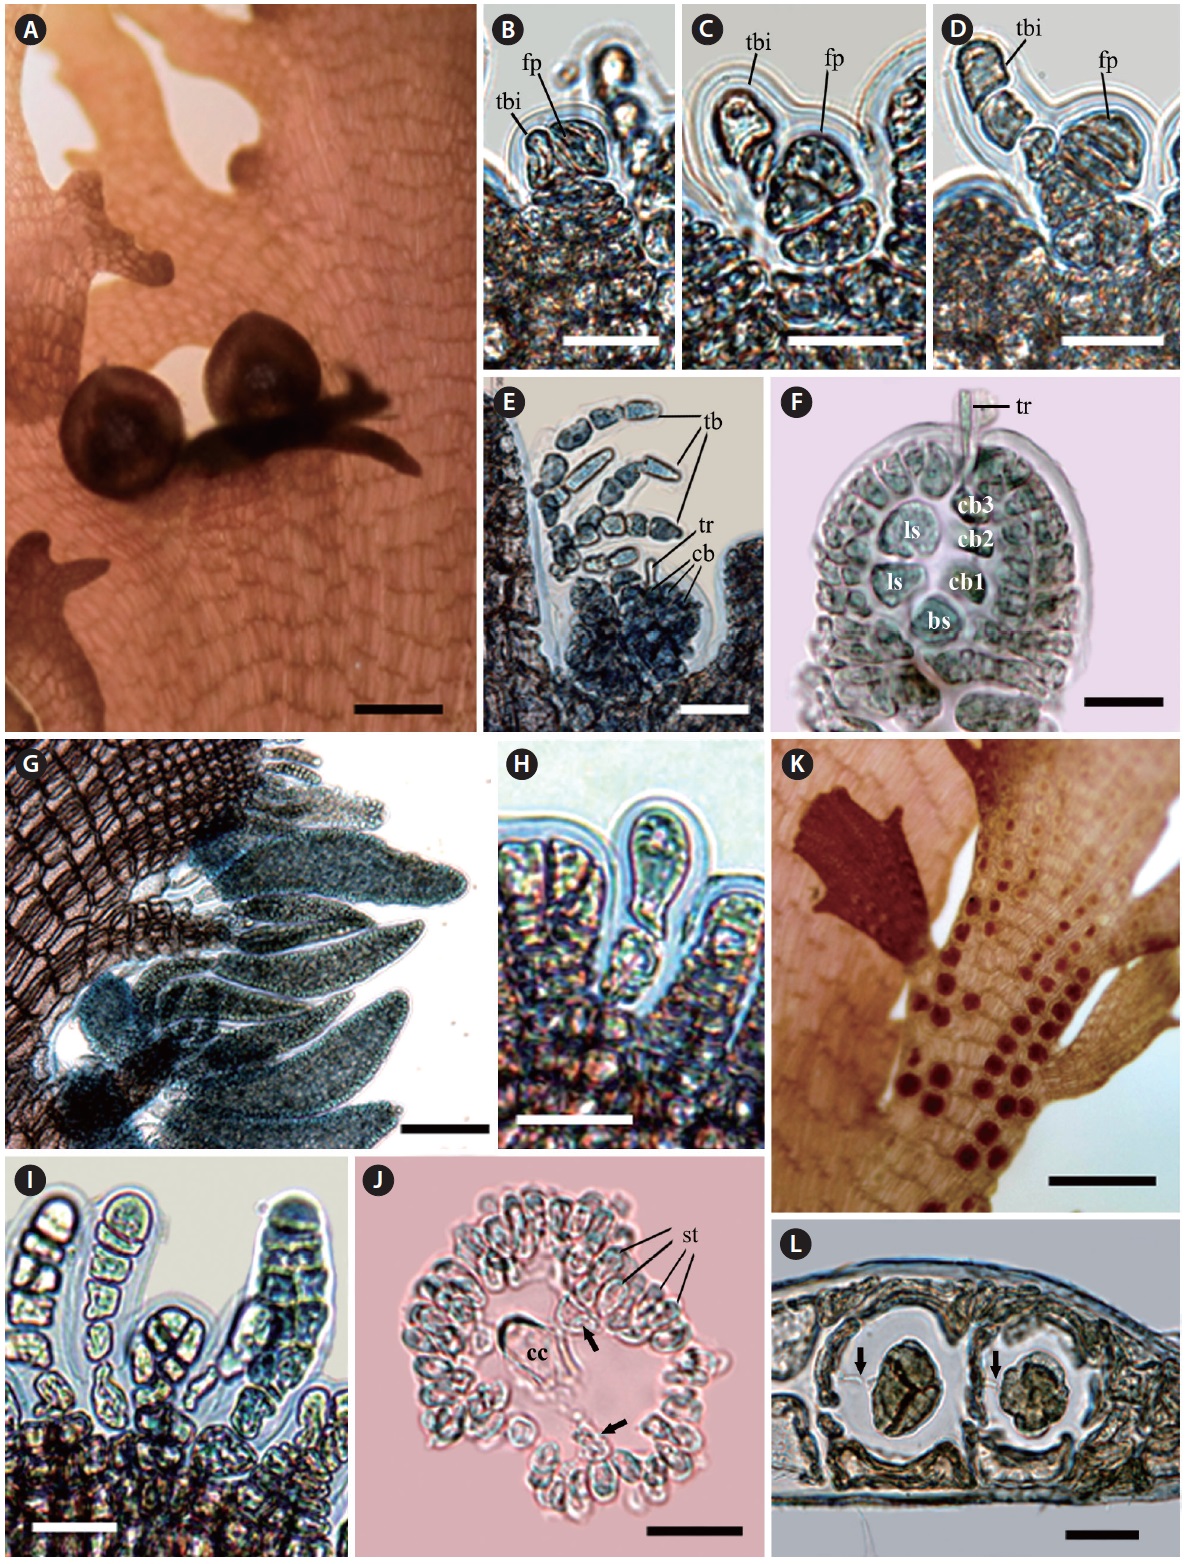 Reproductive structure of Symphyocladia glabra sp. nov. (A) Female reproductive organ producing on the upper margin of blade. (B-F) Development of female reproductive organ (bs, basal sterile cell; cb, carpogonial branch; fp, fertile pericentral cell; ls, lateral sterile cell; tb, trichoblast; tbi, trichoblast initial; tr, tricogyne). (G) Spermatangial branchlets producing along the upper margin of blade. (H & I) Development of male reproductive organ. (J) Cross-section view of mature spermatangial branchlet showing a central cell (cc) and pericentral cells (arrows) surrounded by numerous spermatangia (st). (K) Tetrasporangial stichidia producing on the upper margin of blade. (L) Development of tetrasporangia, which are connected with a stalk cell by a pit-connection (arrows). Scale bars represent: A, 500 μm; B-D, H-J & L, 20 μm; E & F, 50 μm; G, 100 μm; K, 300 μm.